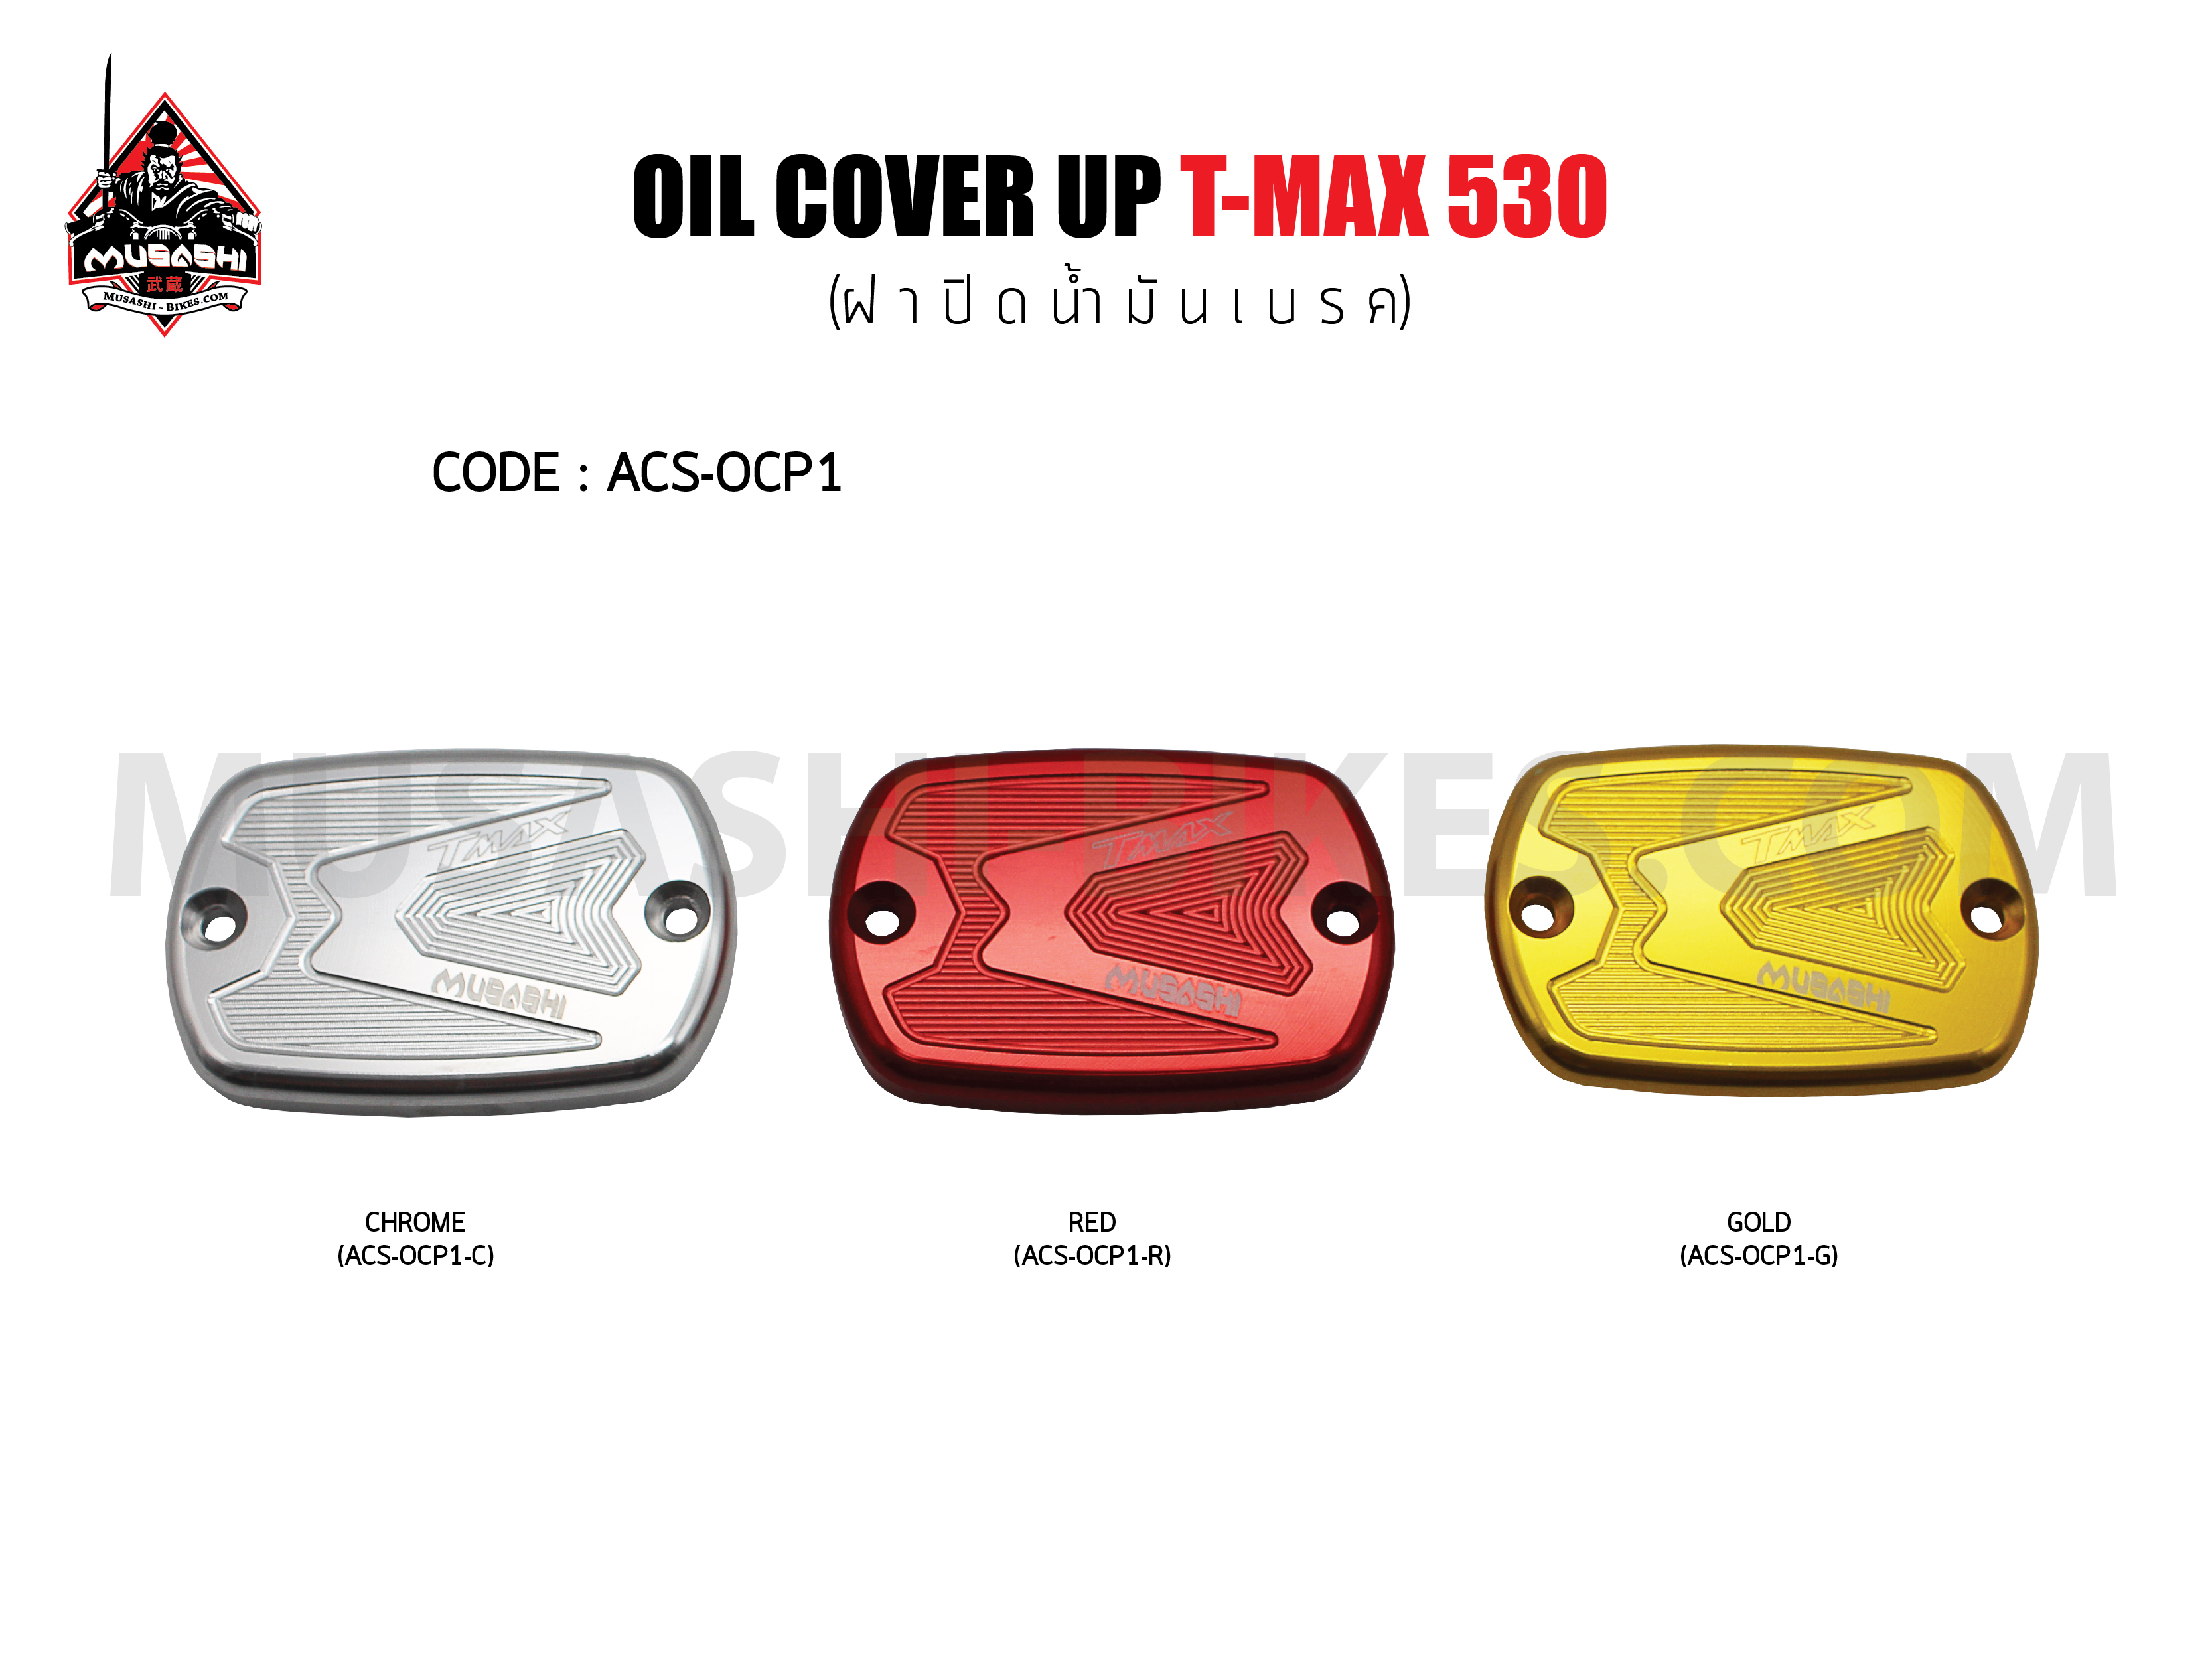 Oil Cover Up - Tmax